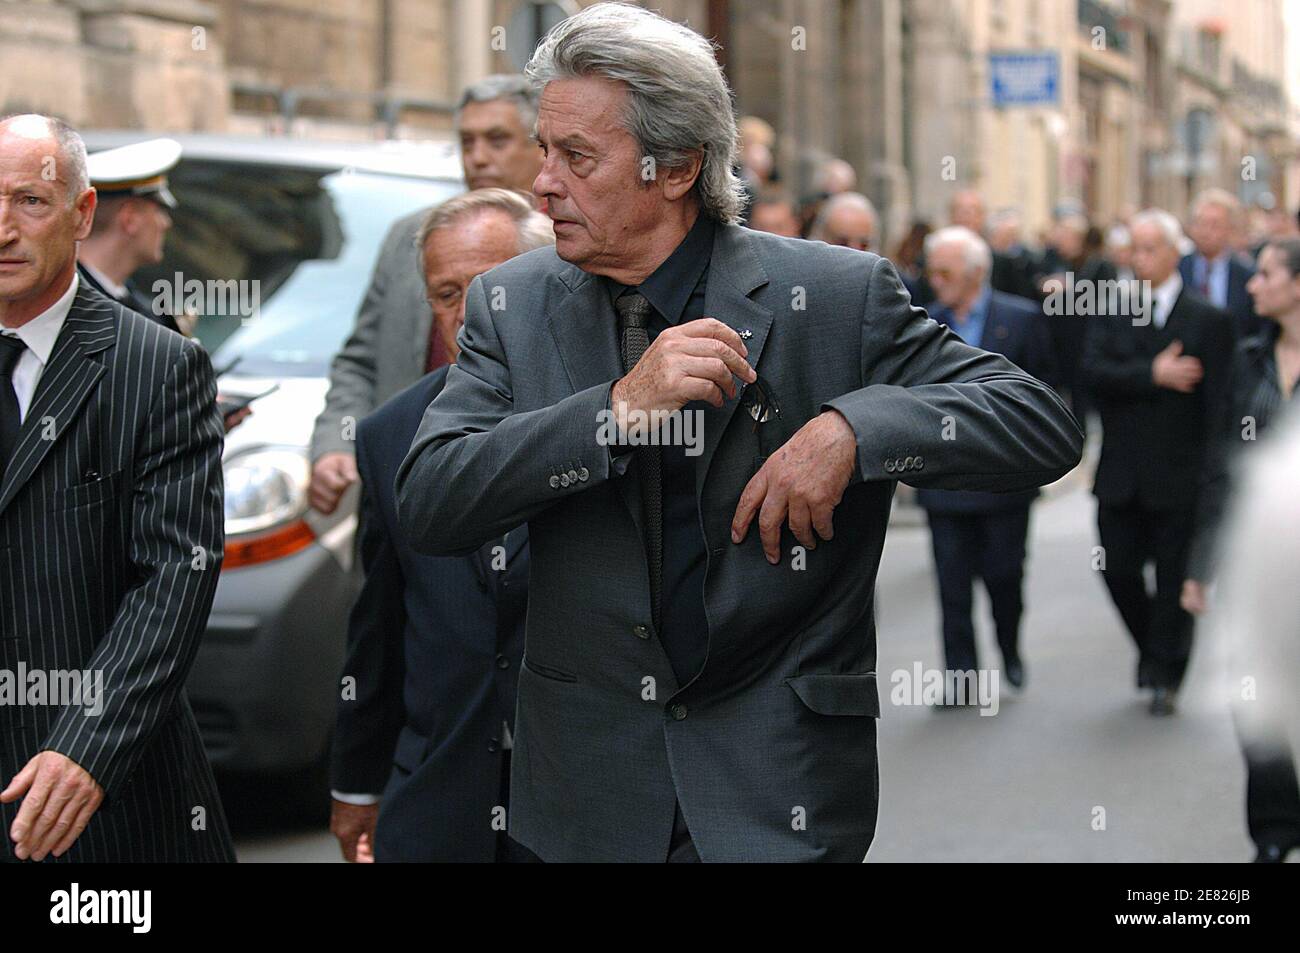 French actor Alain Delon leaves the Funeral mass for French actor Jean- Claude Brialy held at 'Saint-Louis Church' in Paris, France on June 4,  2007. Photo by ABACAPRESS.COM Stock Photo - Alamy